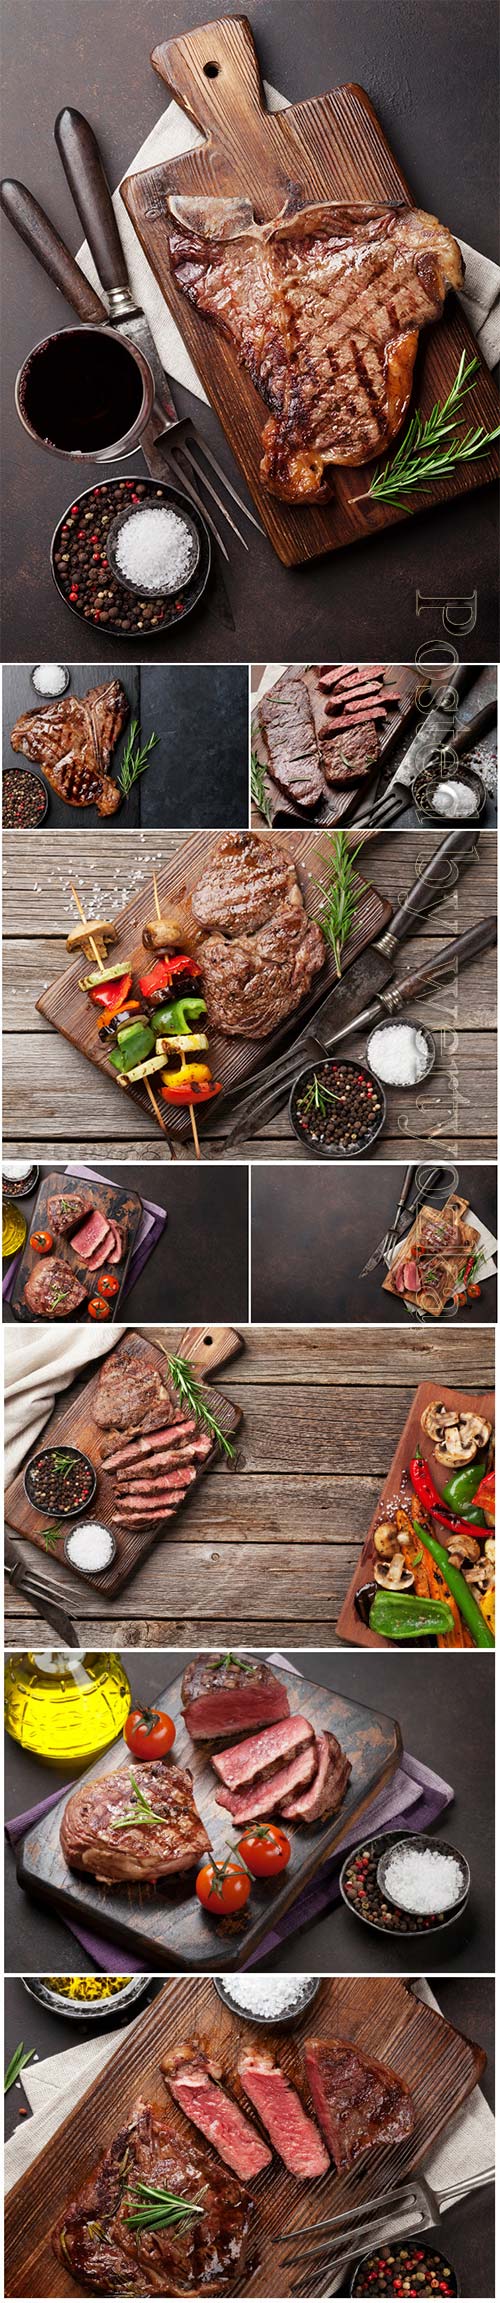 Beef steak and grilled beautiful stock photo